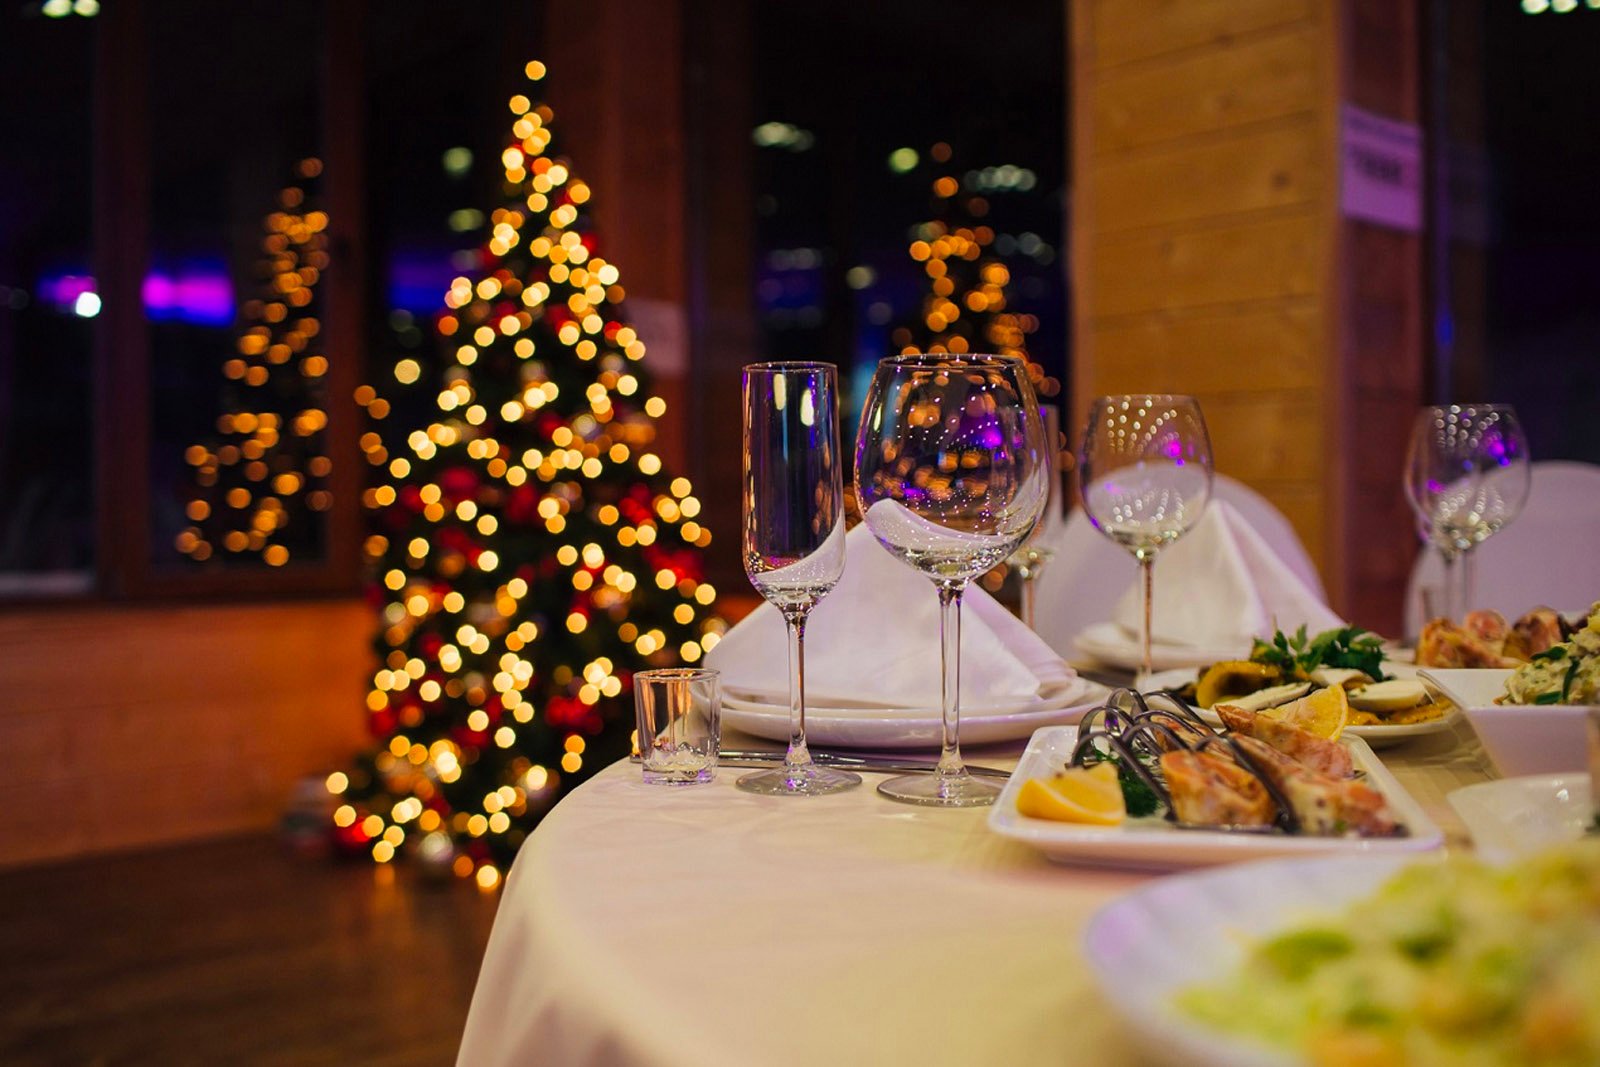 cuisine setting with Christmas tree in background